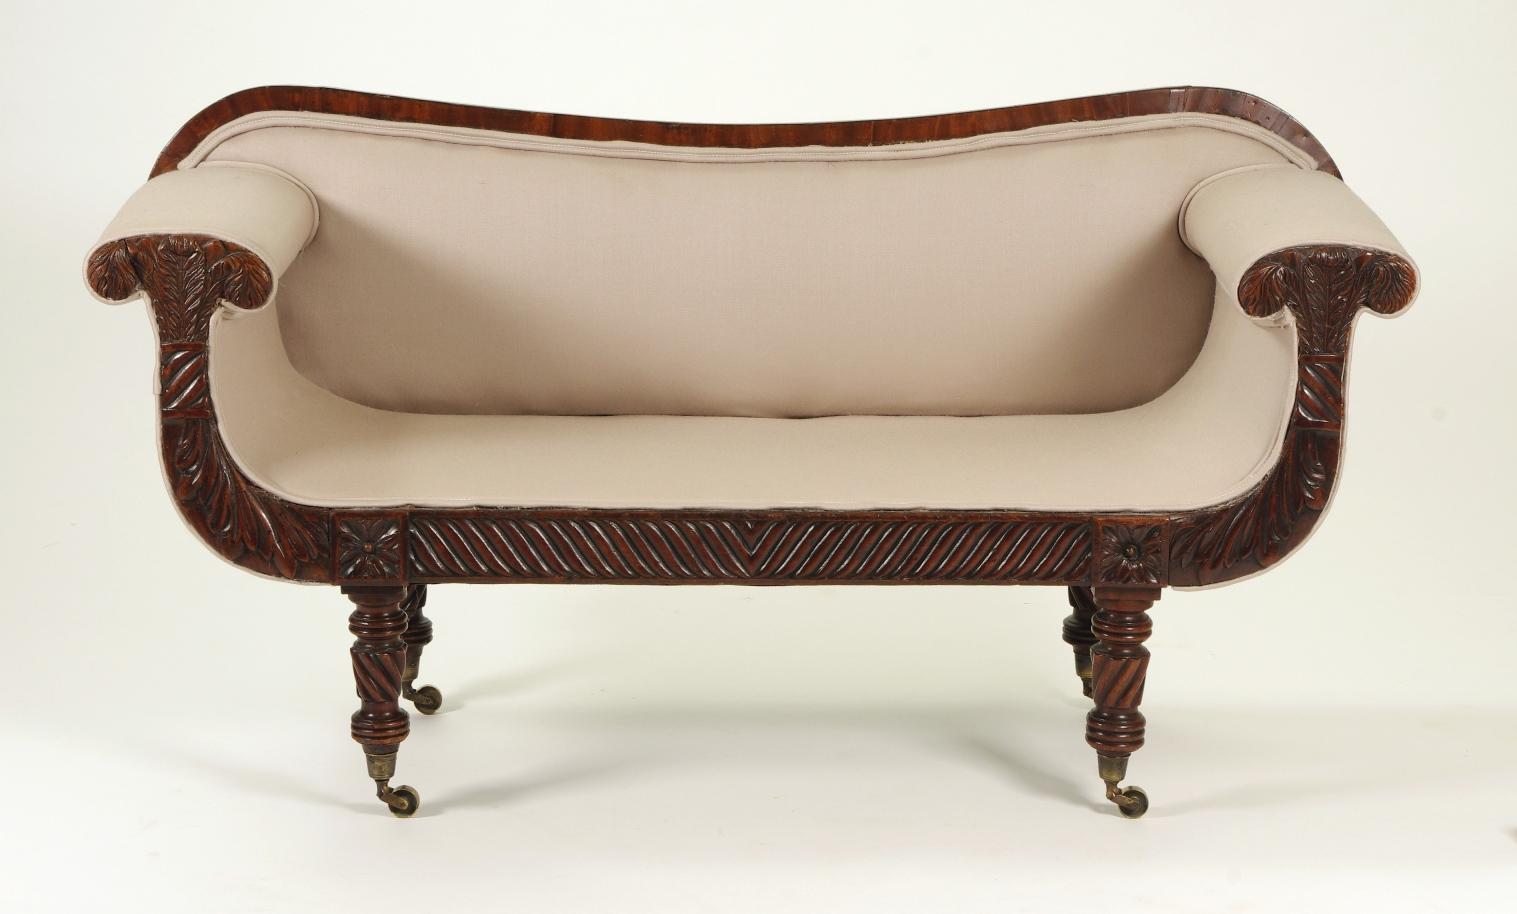 Regency mahogany child's sofa, the serpentine top rail over the upholstered seat and back; the mushroom arms with Prince of Wales feathers and acanthus leaves raised on turned legs headed by carved rosettes and ending with brass casters, joined by a